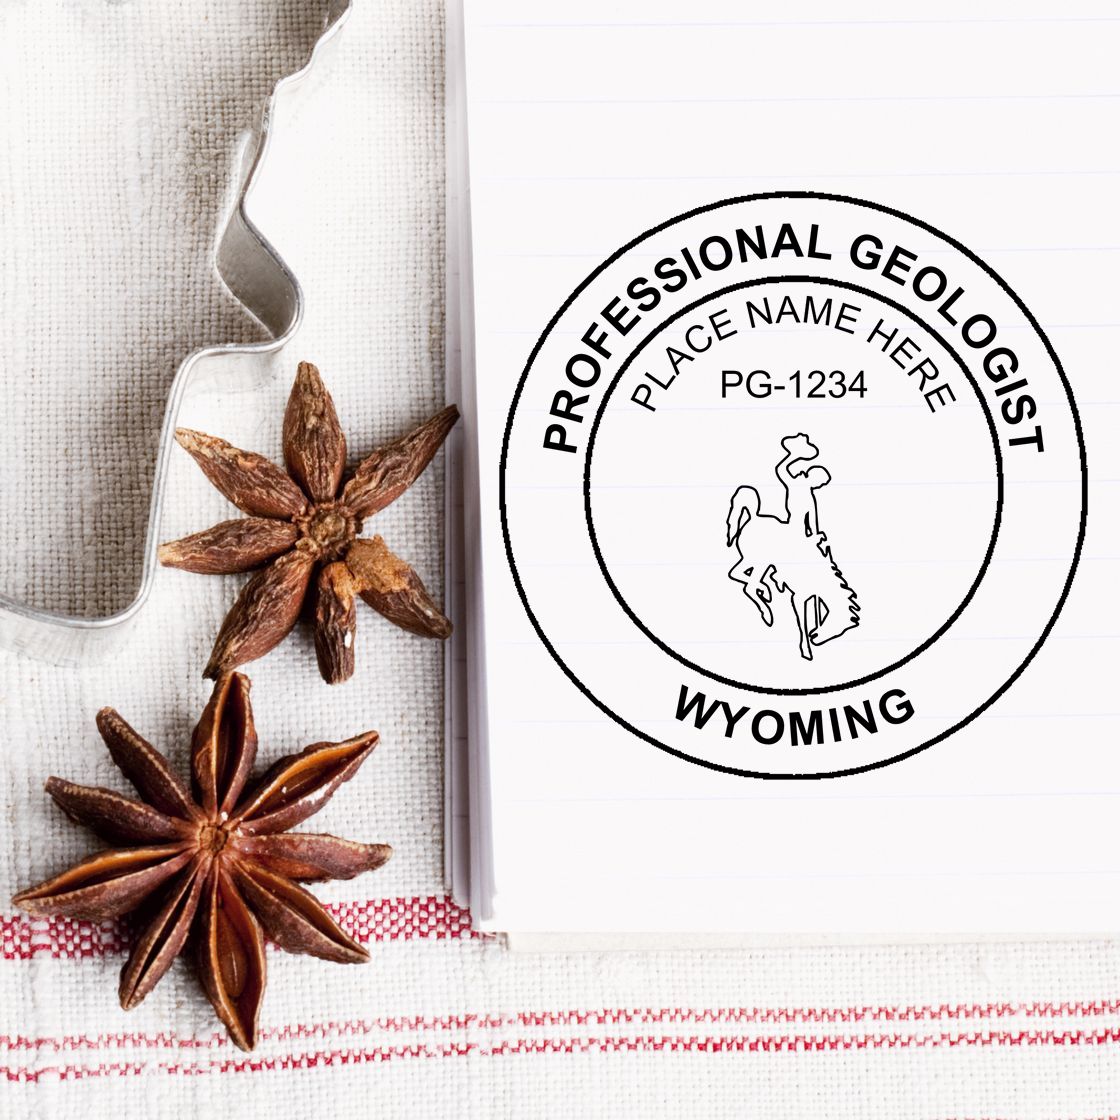 A lifestyle photo showing a stamped image of the Self-Inking Wyoming Geologist Stamp on a piece of paper